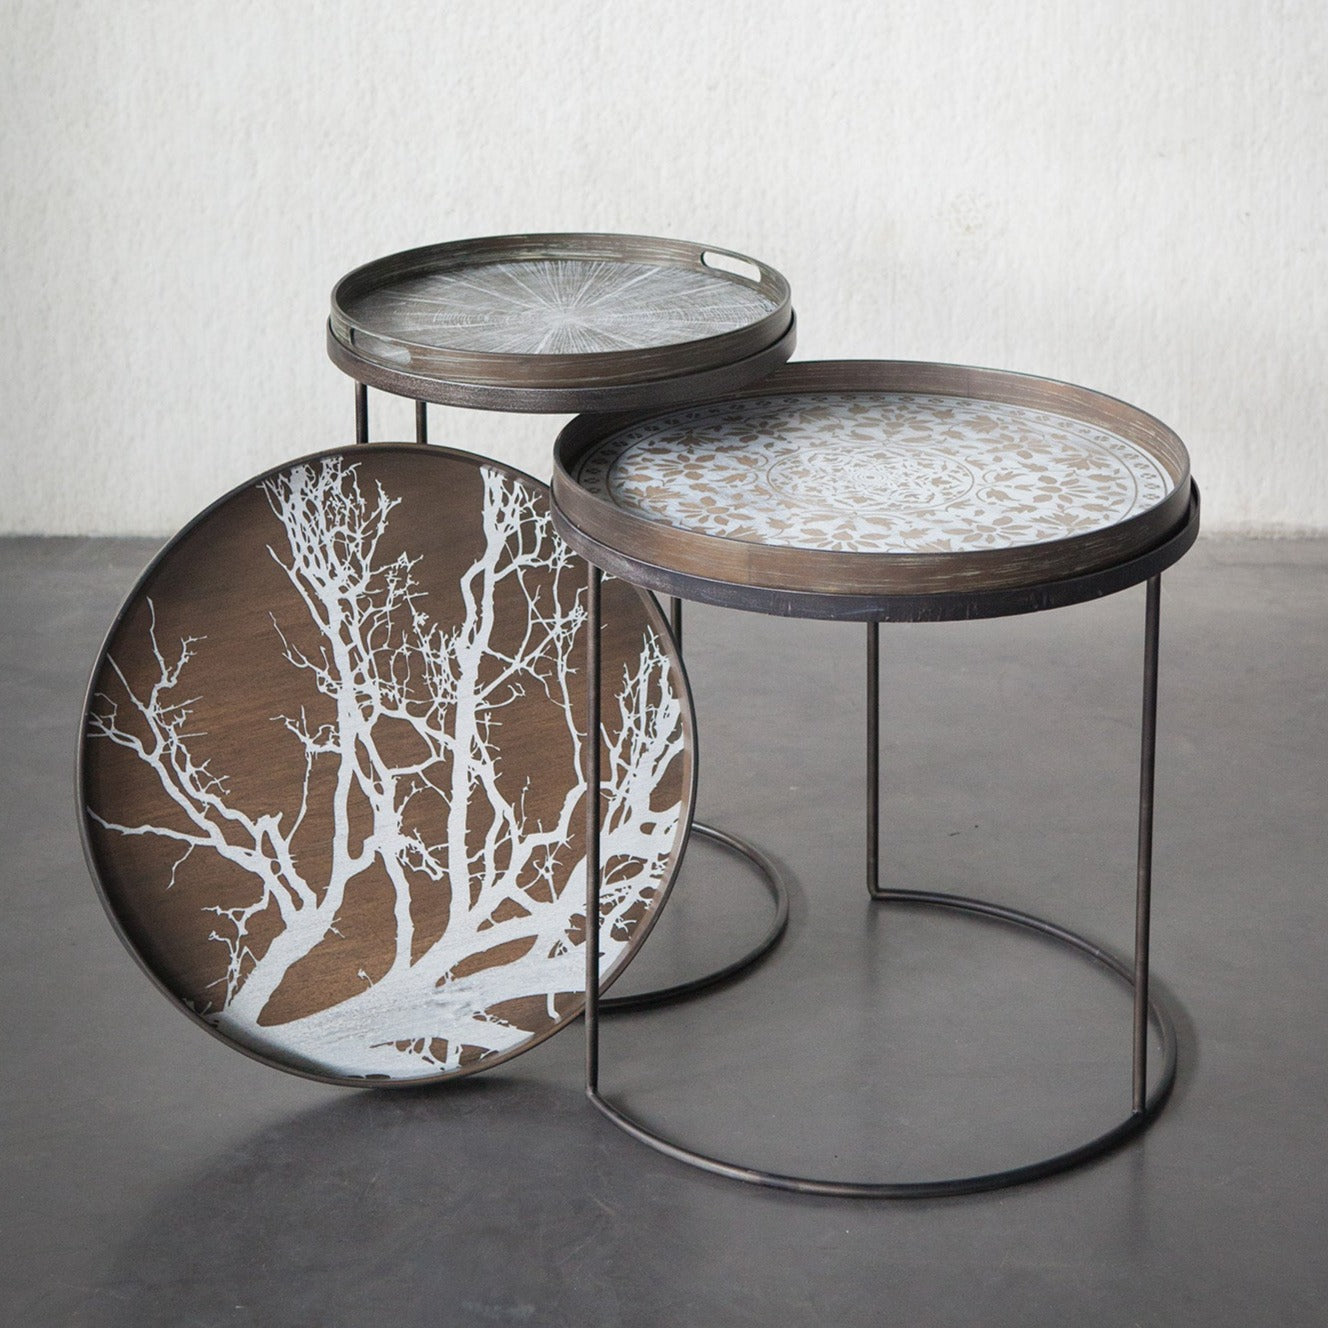 Round Tray Side Tables, Set of 2 (Trays Not Included)